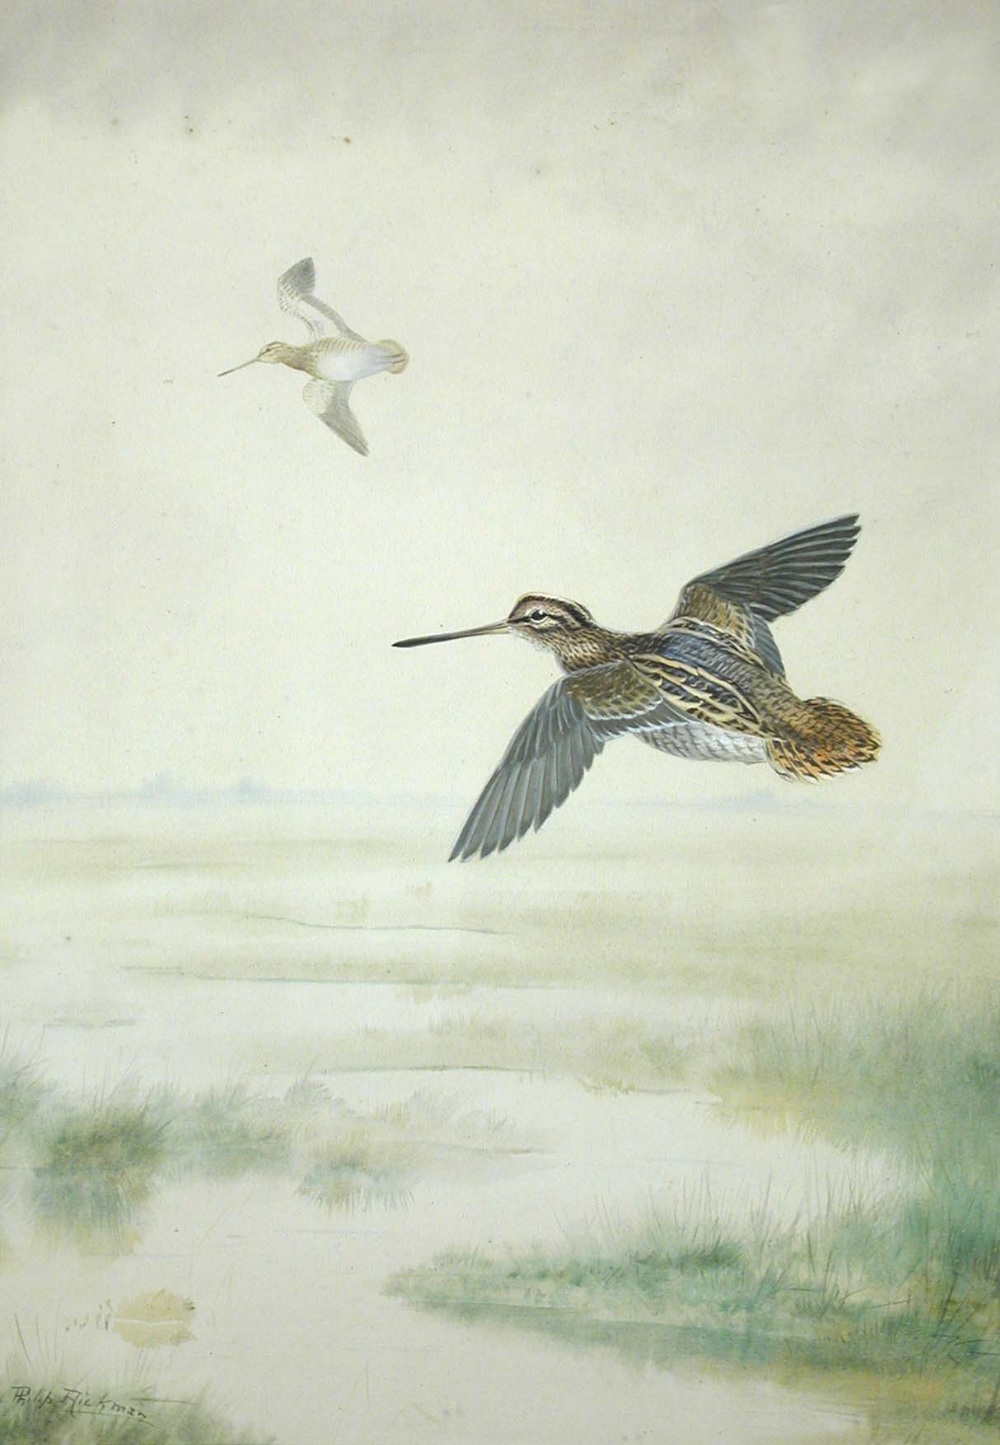 Philip Rickman (British, 1891-1982) Snipe over the marshes signed lower left "Phiip Rickman" and